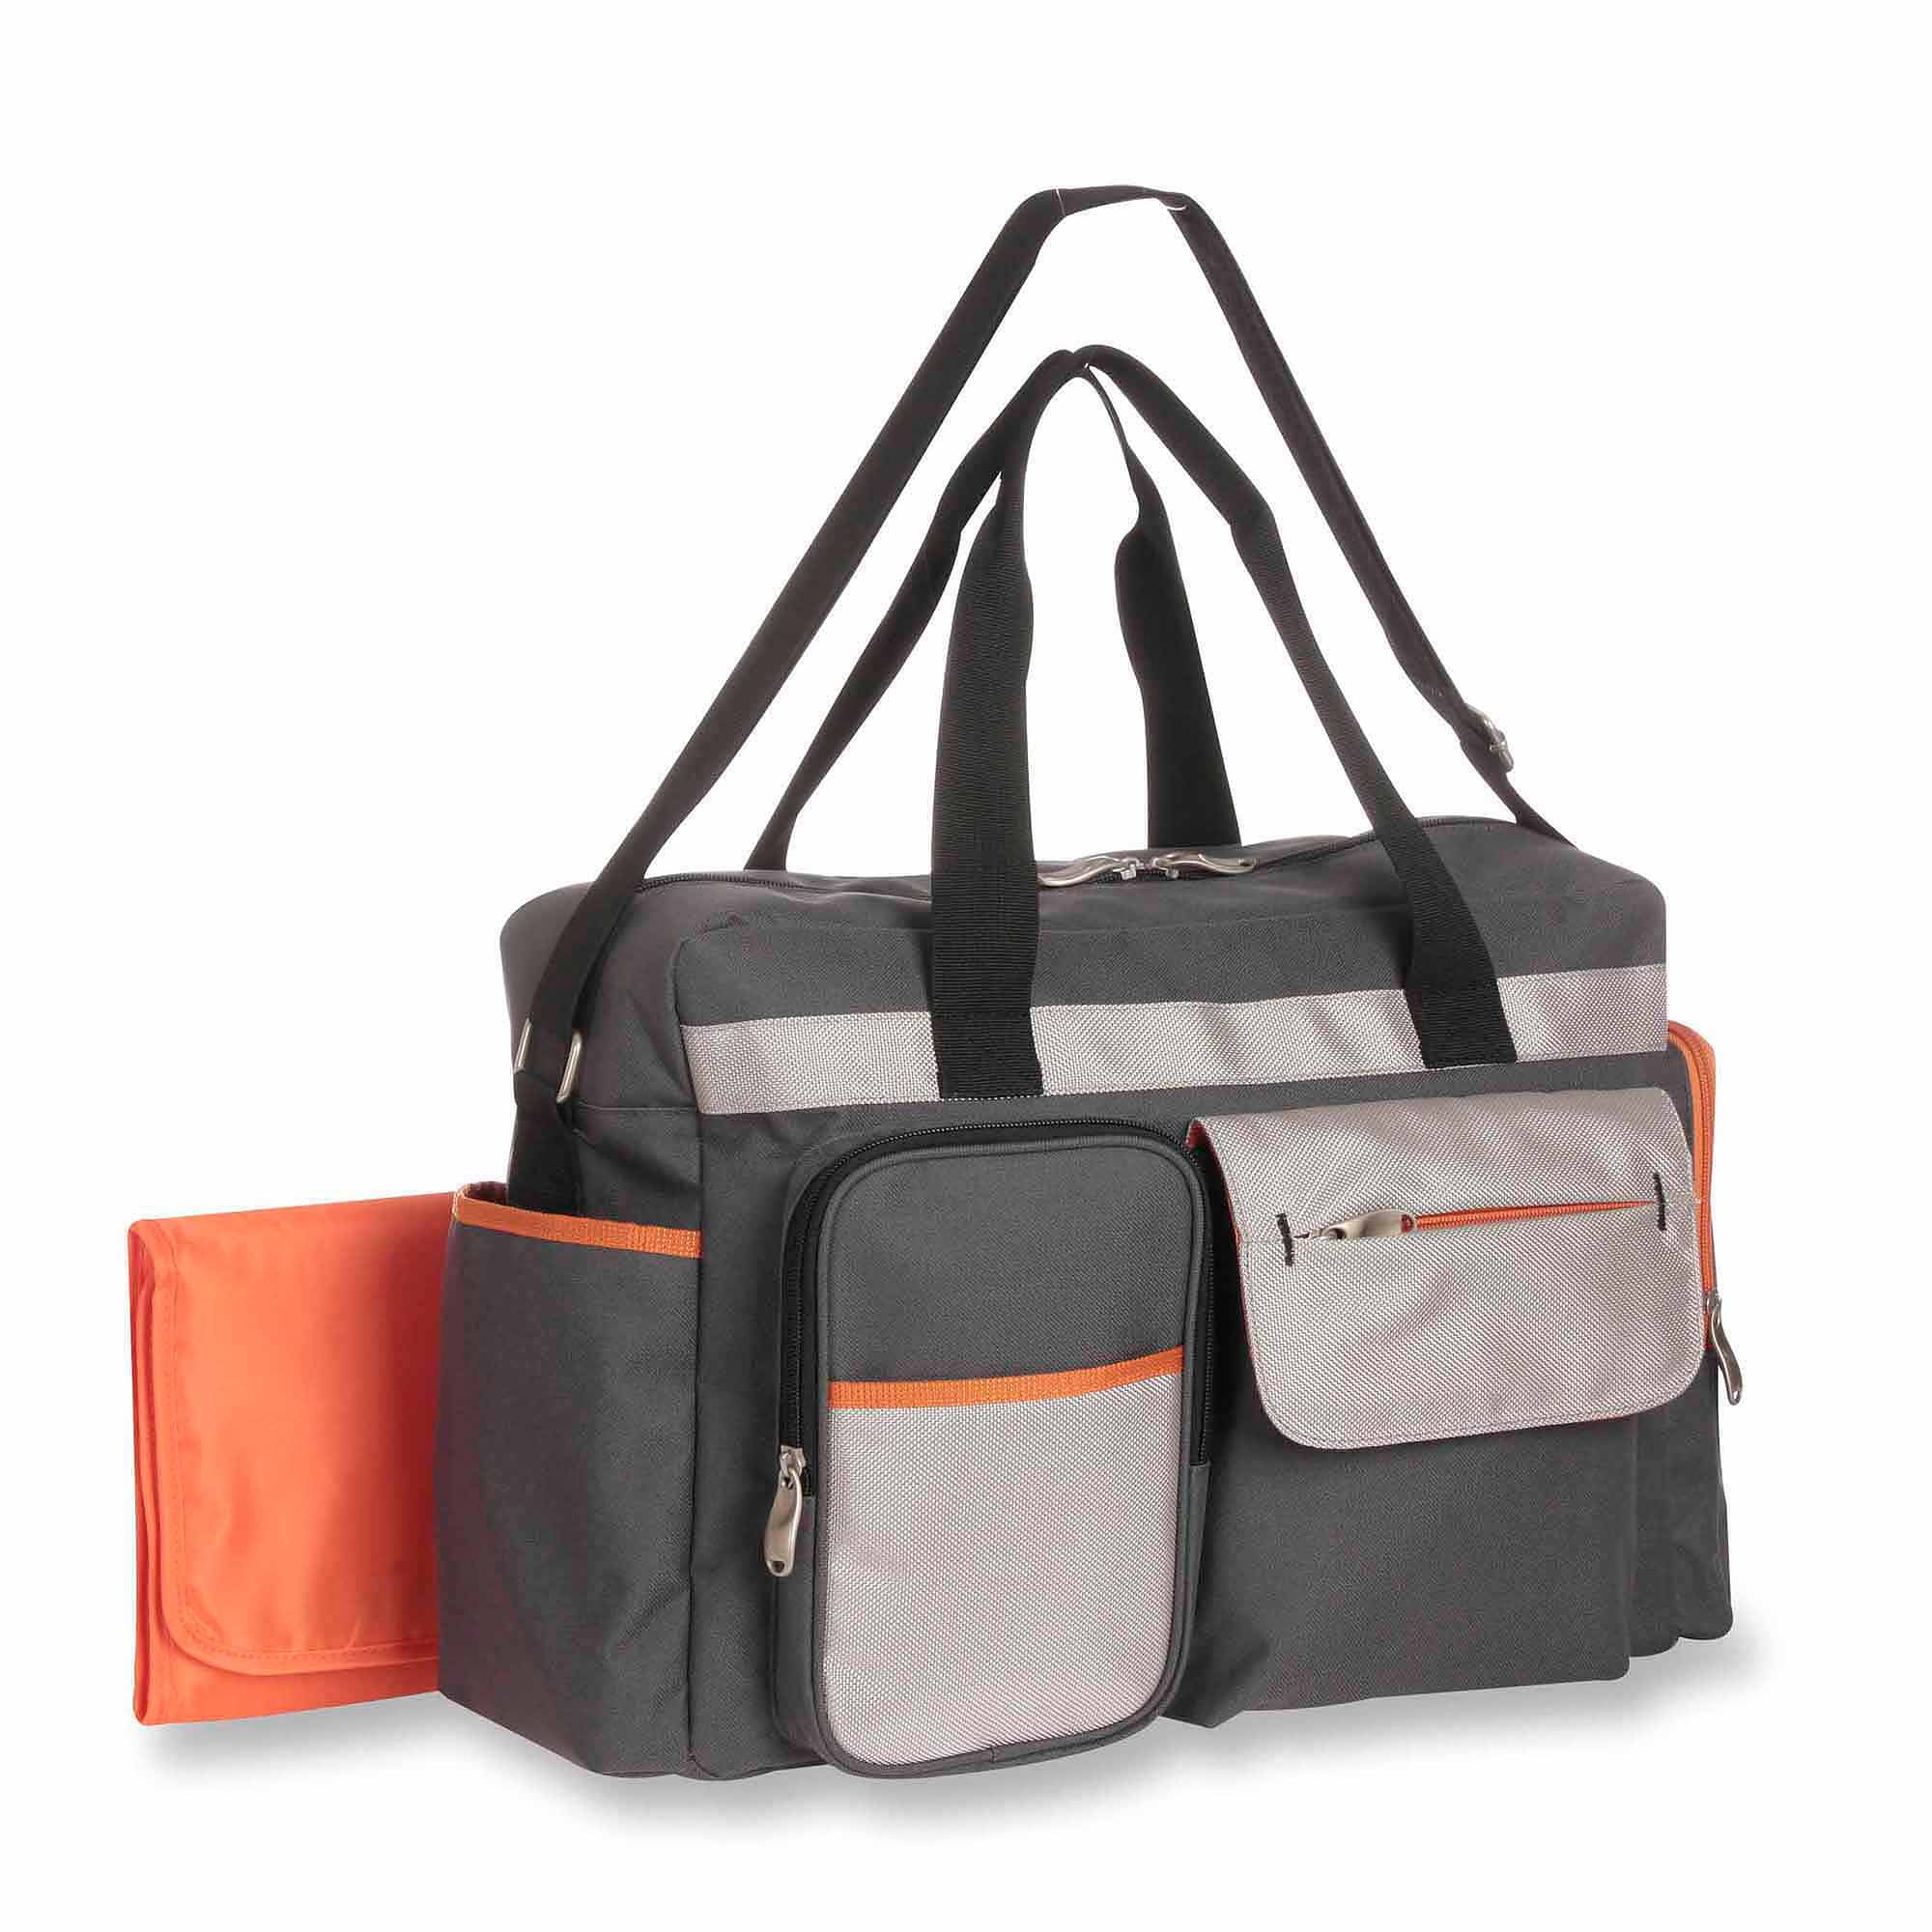 Baby Boom Flap Messenger Diaper Bag with Quick Find System - Grey Print - 0